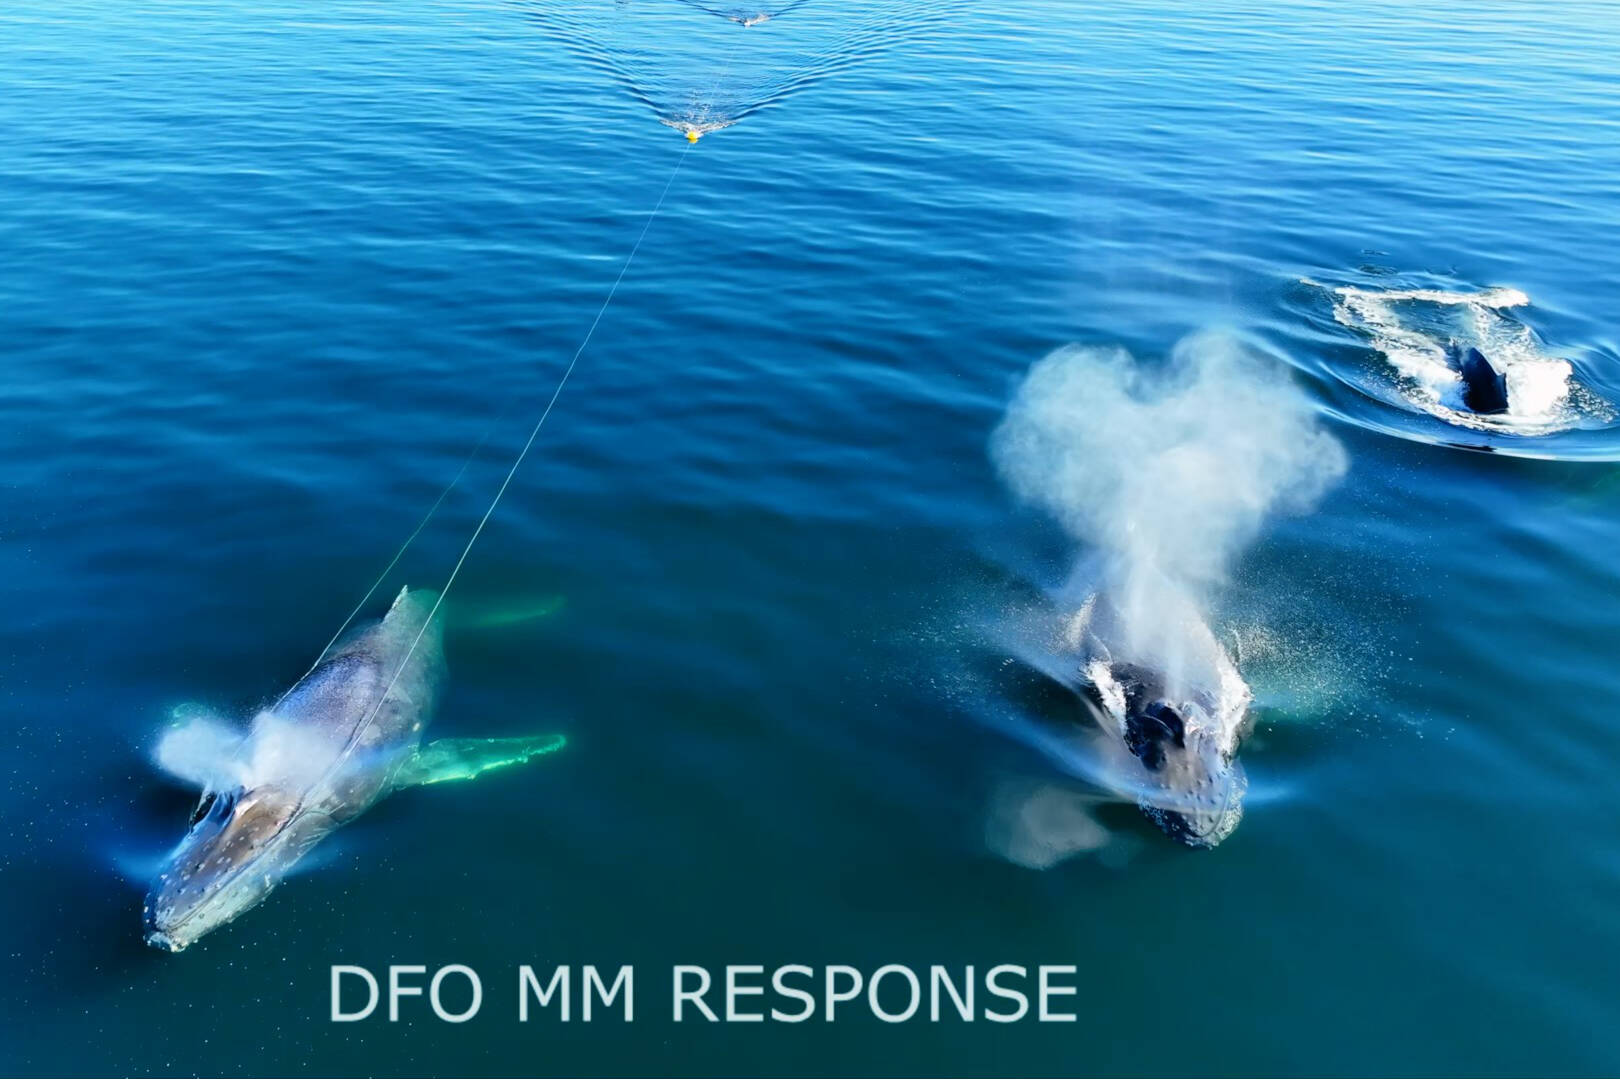 Fisheries and Oceans Canada’s Marine Mammal Rescue team completed a humpback whale disentanglement mission on Oct. 14 near Texada Island. The whale on the left was entangled in 300 feet of marine rope and a buoy, used for prawn traps.